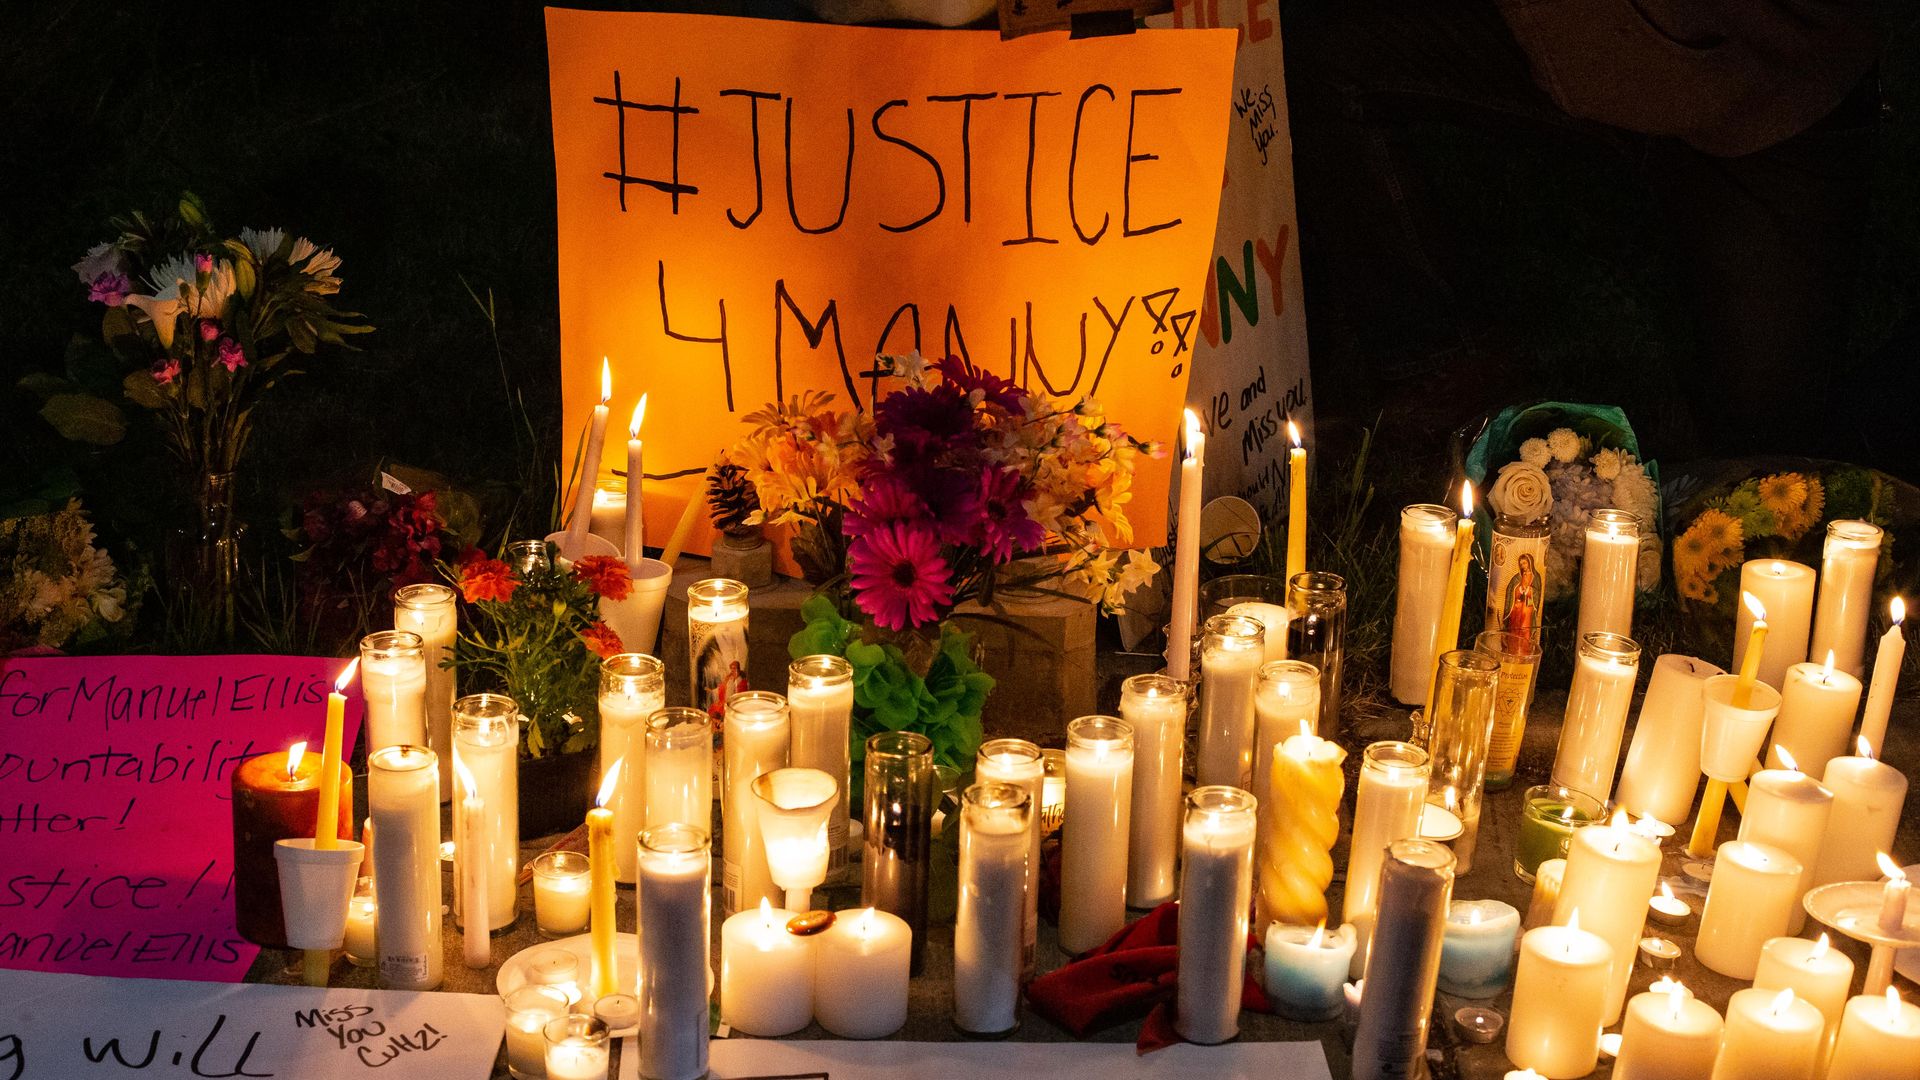 Candles surround a sign that says #Justice4Manny, with flowers.